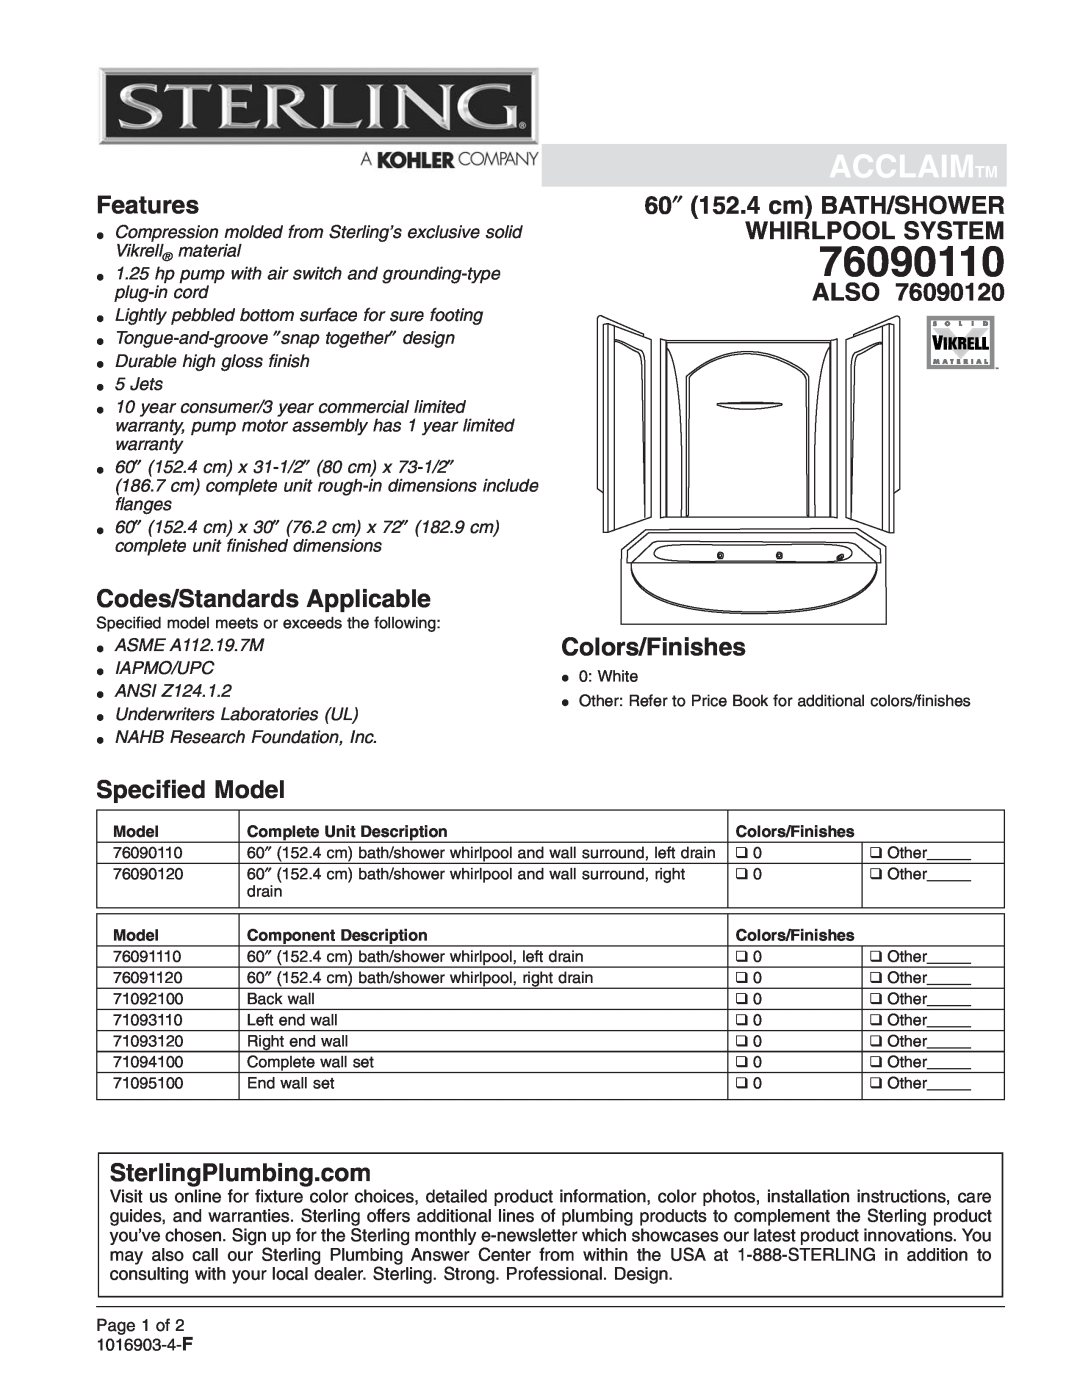 Sterling Plumbing 76090110 warranty Acclaimtm, Features, Codes/Standards Applicable, Also, Colors/Finishes, Speciﬁed Model 